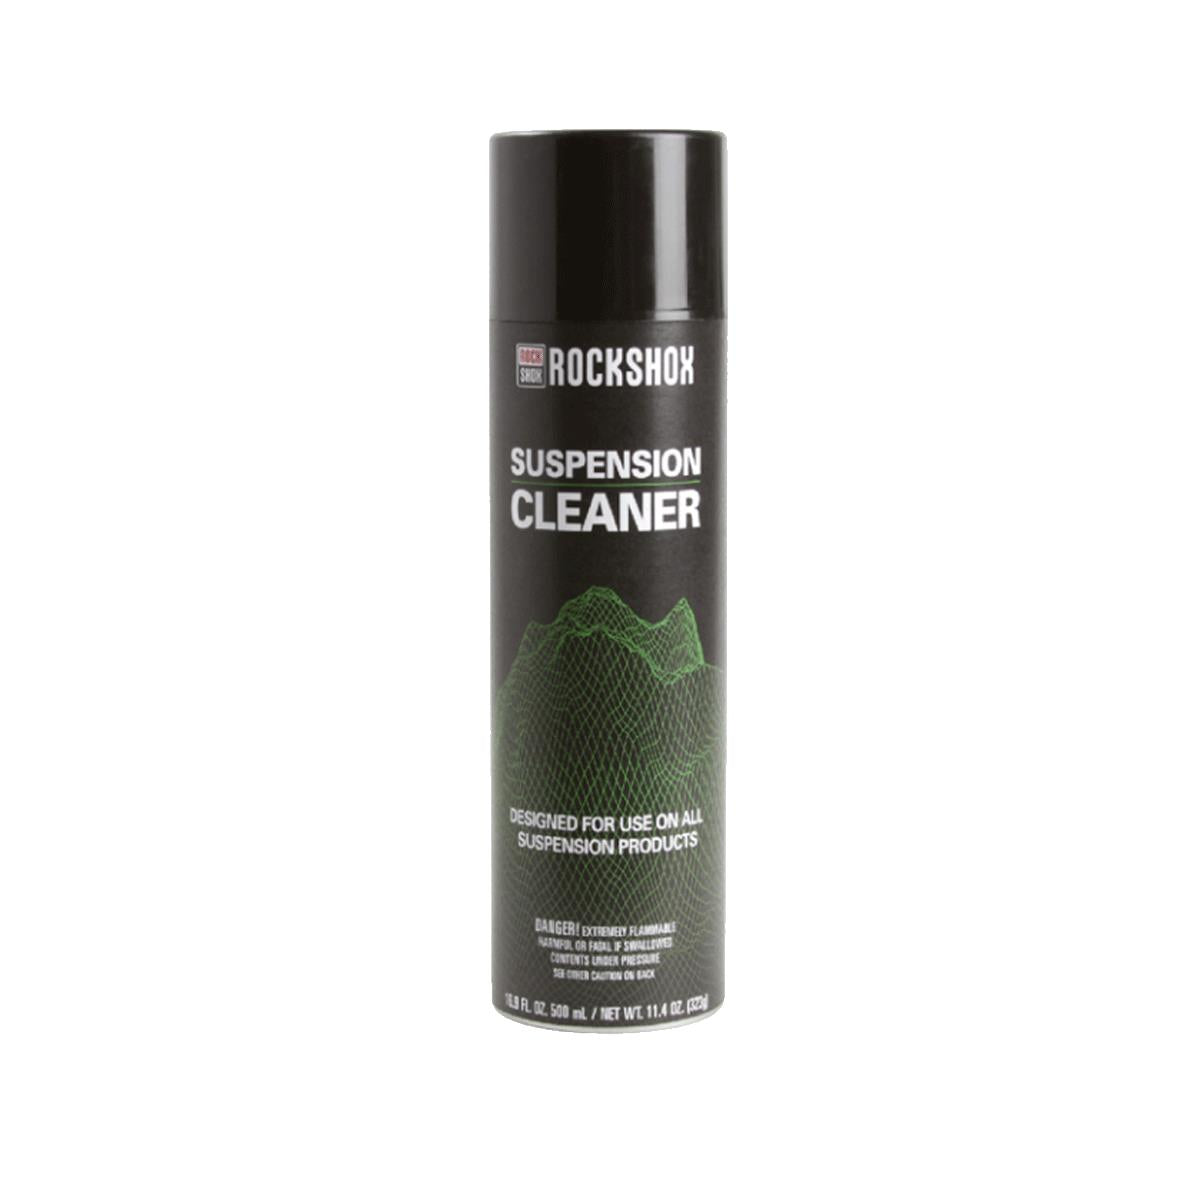 ROCKSHOX SUSPENSION CLEANER 16.9 OZ. (FOR USE WITH ALL SUSPENSION PRODUCTS)